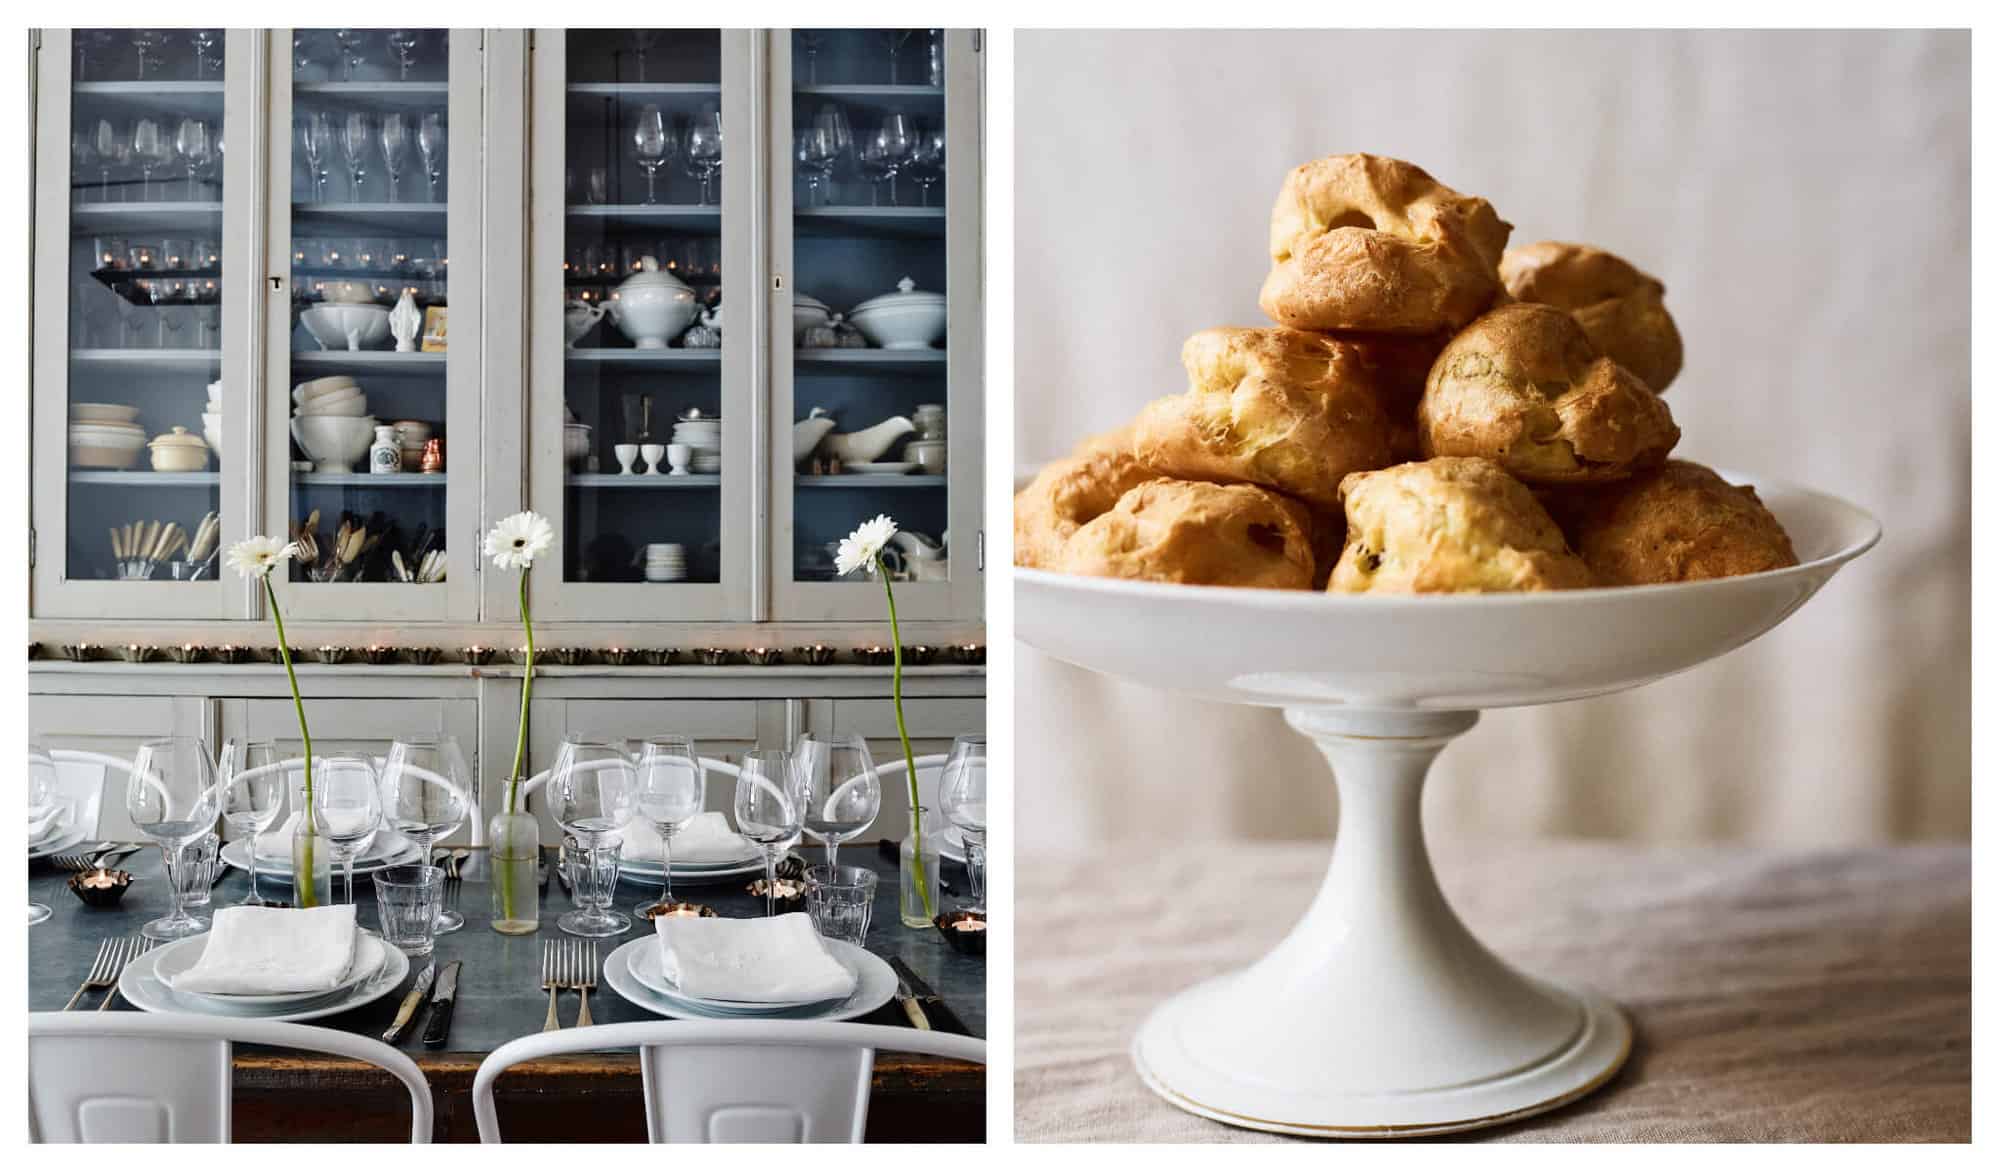 Left: A dining table laden with wine glasses, white plates, and white flowers, is pictured in front of a sage cupboard filled with dishes. Right: A plate of Gougères presented on a white plate.